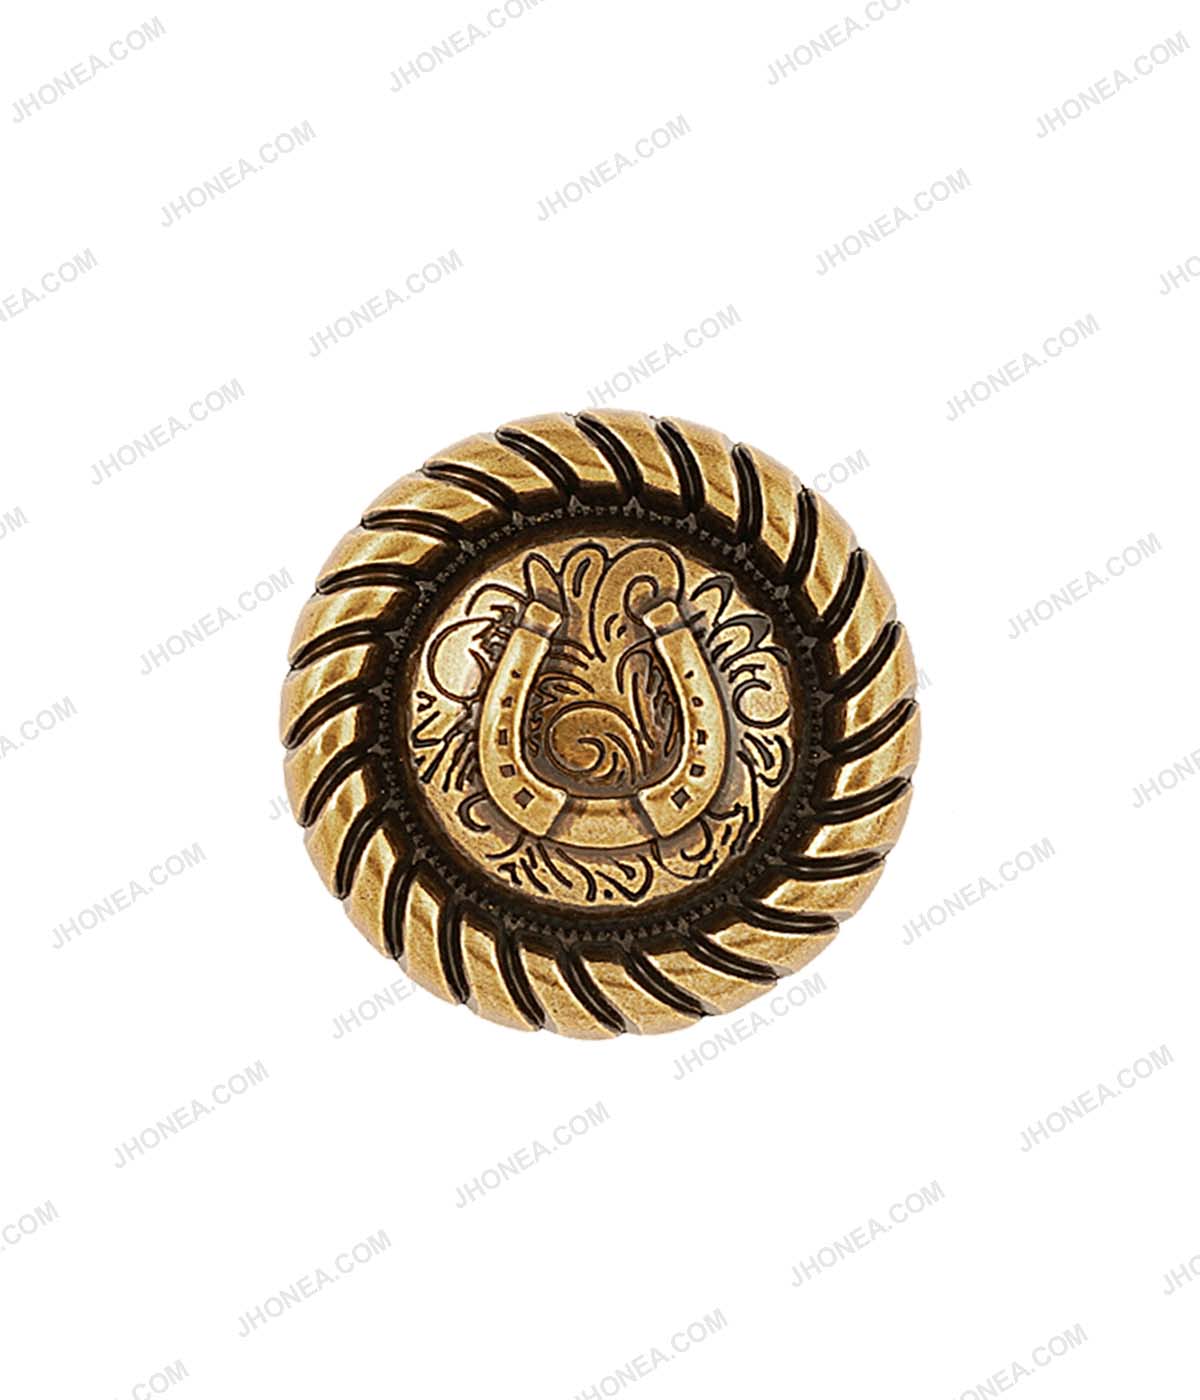 Horse-shoe Design Indo-Western Style Antique Metal Buttons